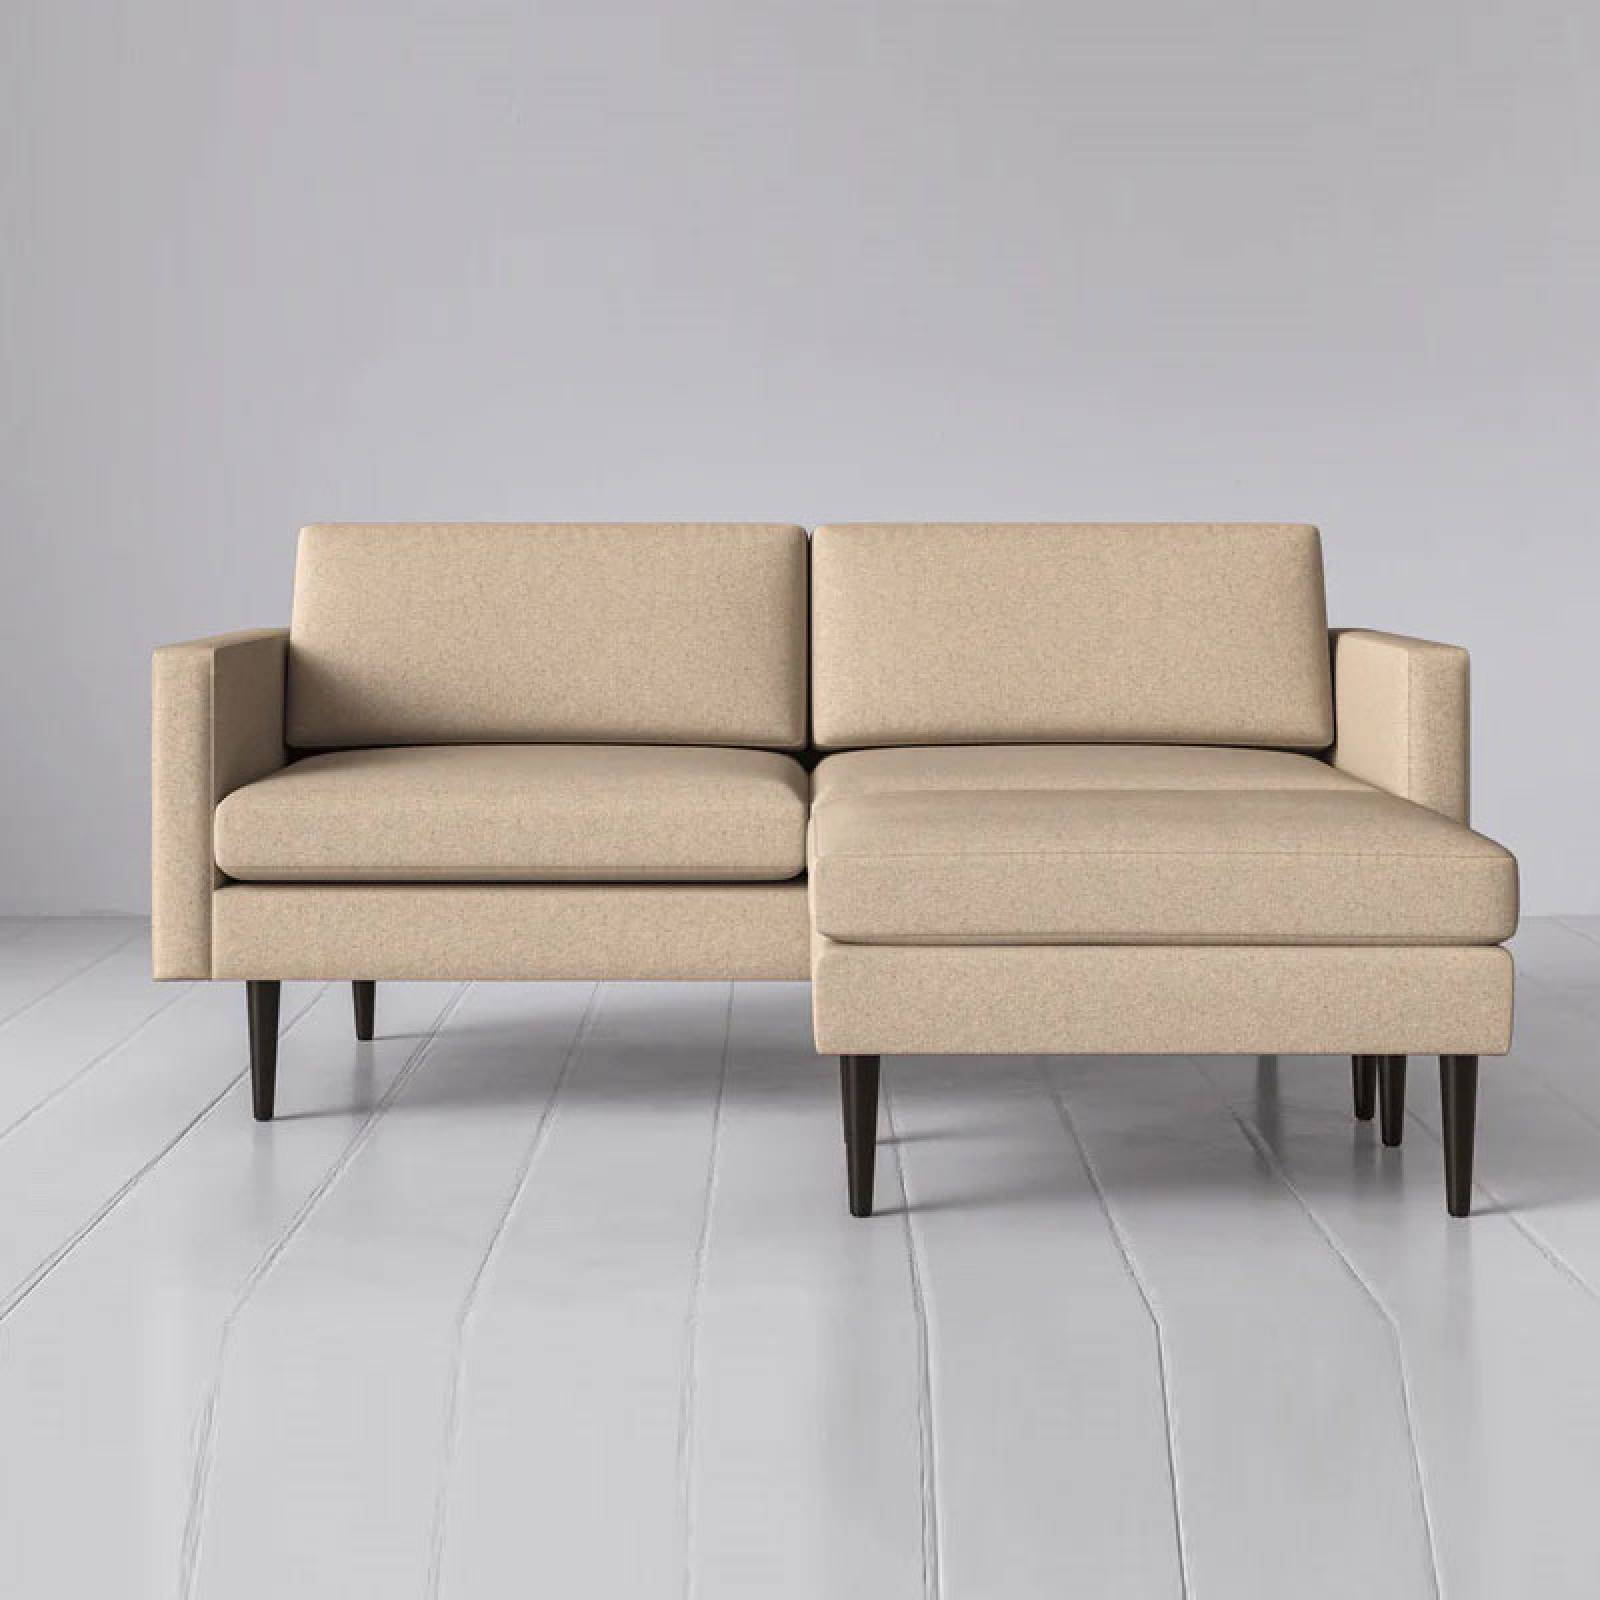 Swyft - Model 01 - 2 Seater Sofa Right Corner Chaise thumbnails